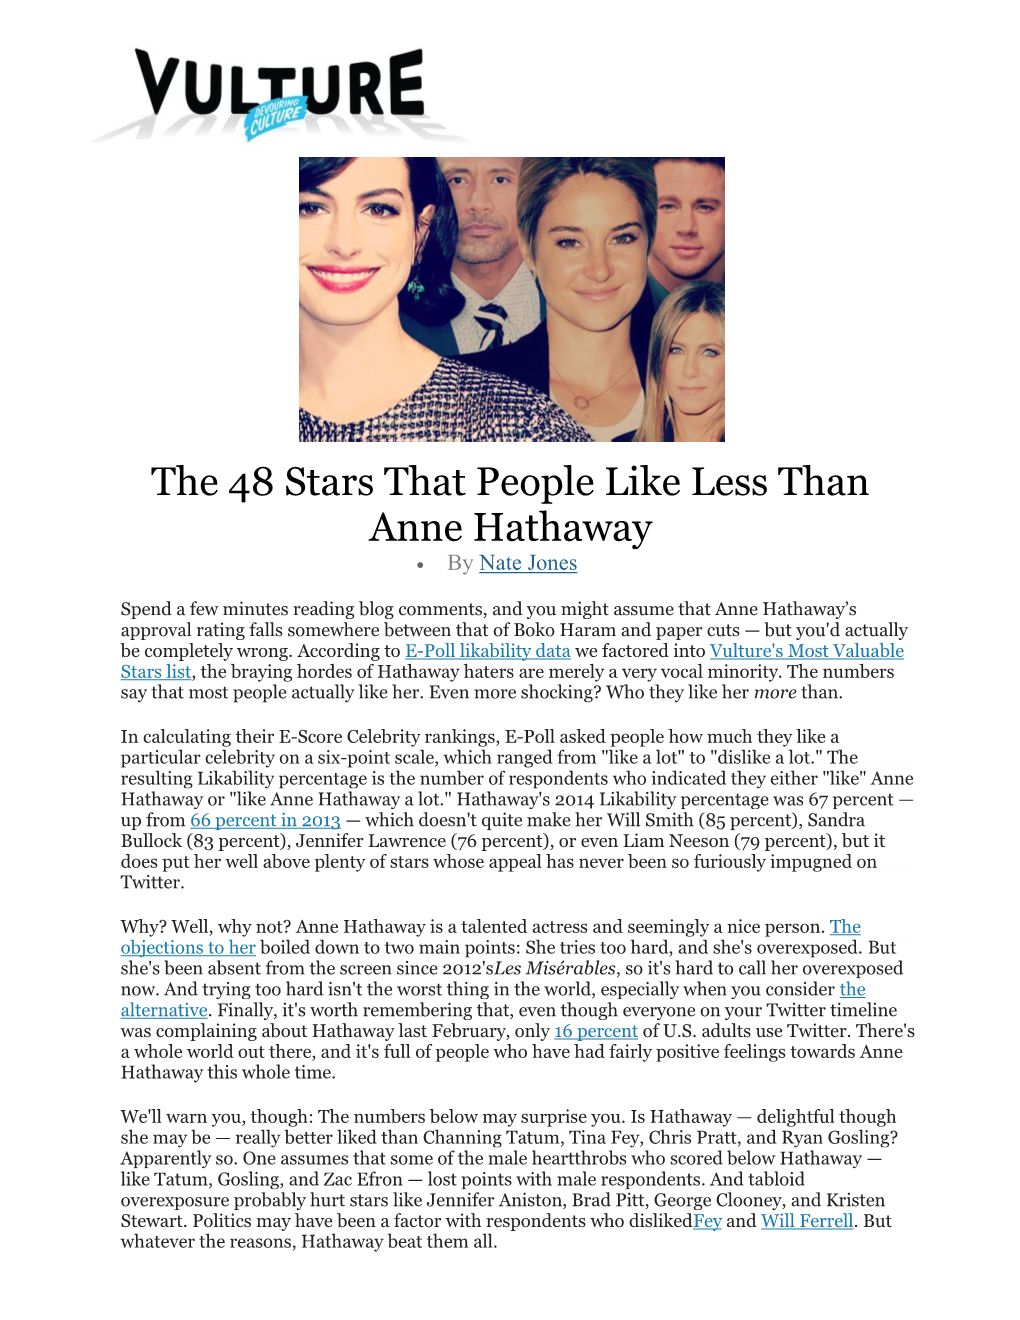 The 48 Stars That People Like Less Than Anne Hathaway  by Nate Jones